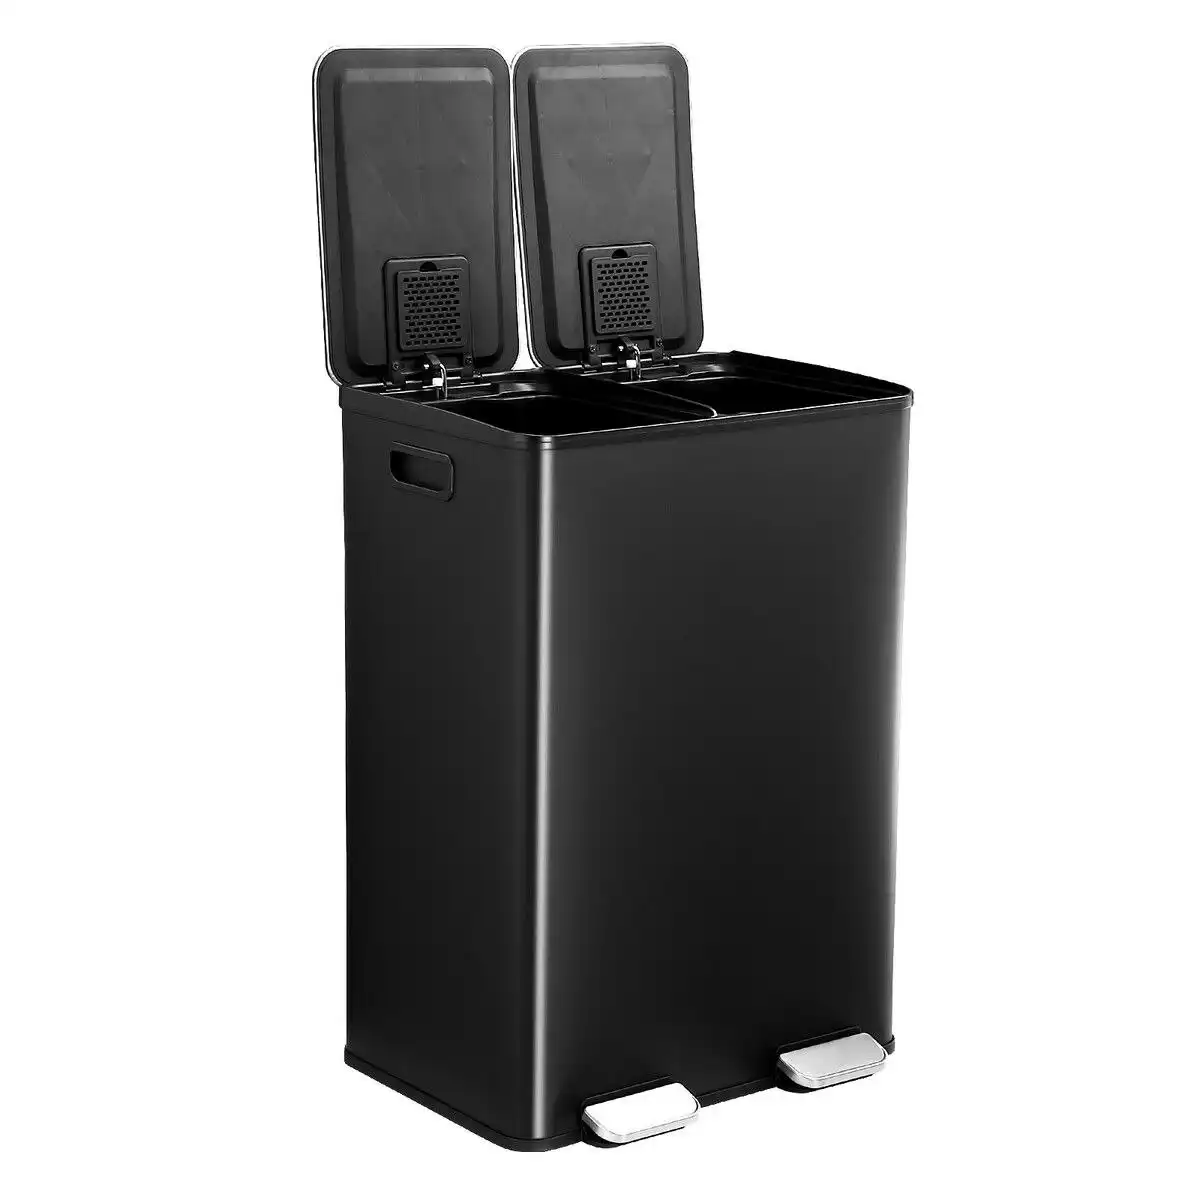 Maxkon 60L Rubbish Bin Dual Compartment Pedal Garbage Can Recycling Waste Stainless Steel Trashcan Soft Closing Lid Kitchen Black